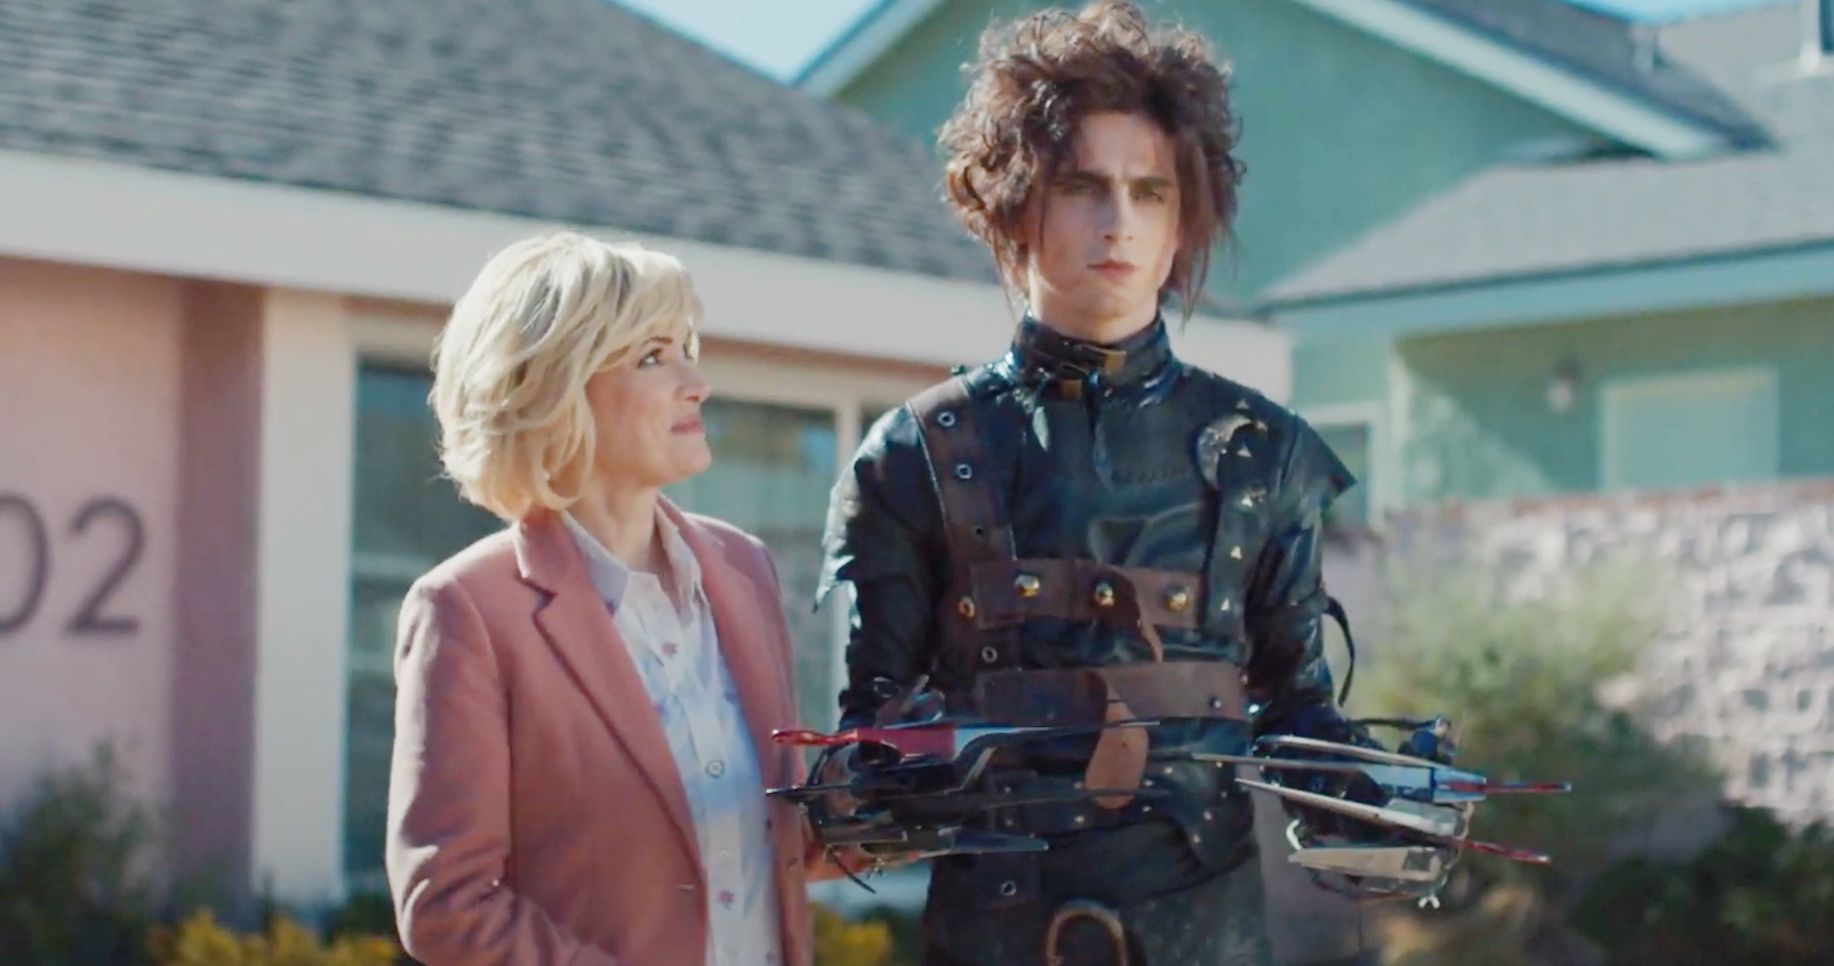 Timoth&#233e Chalamet Is Edward Scissorhands' Son in Cadillac Super Bowl Commercial